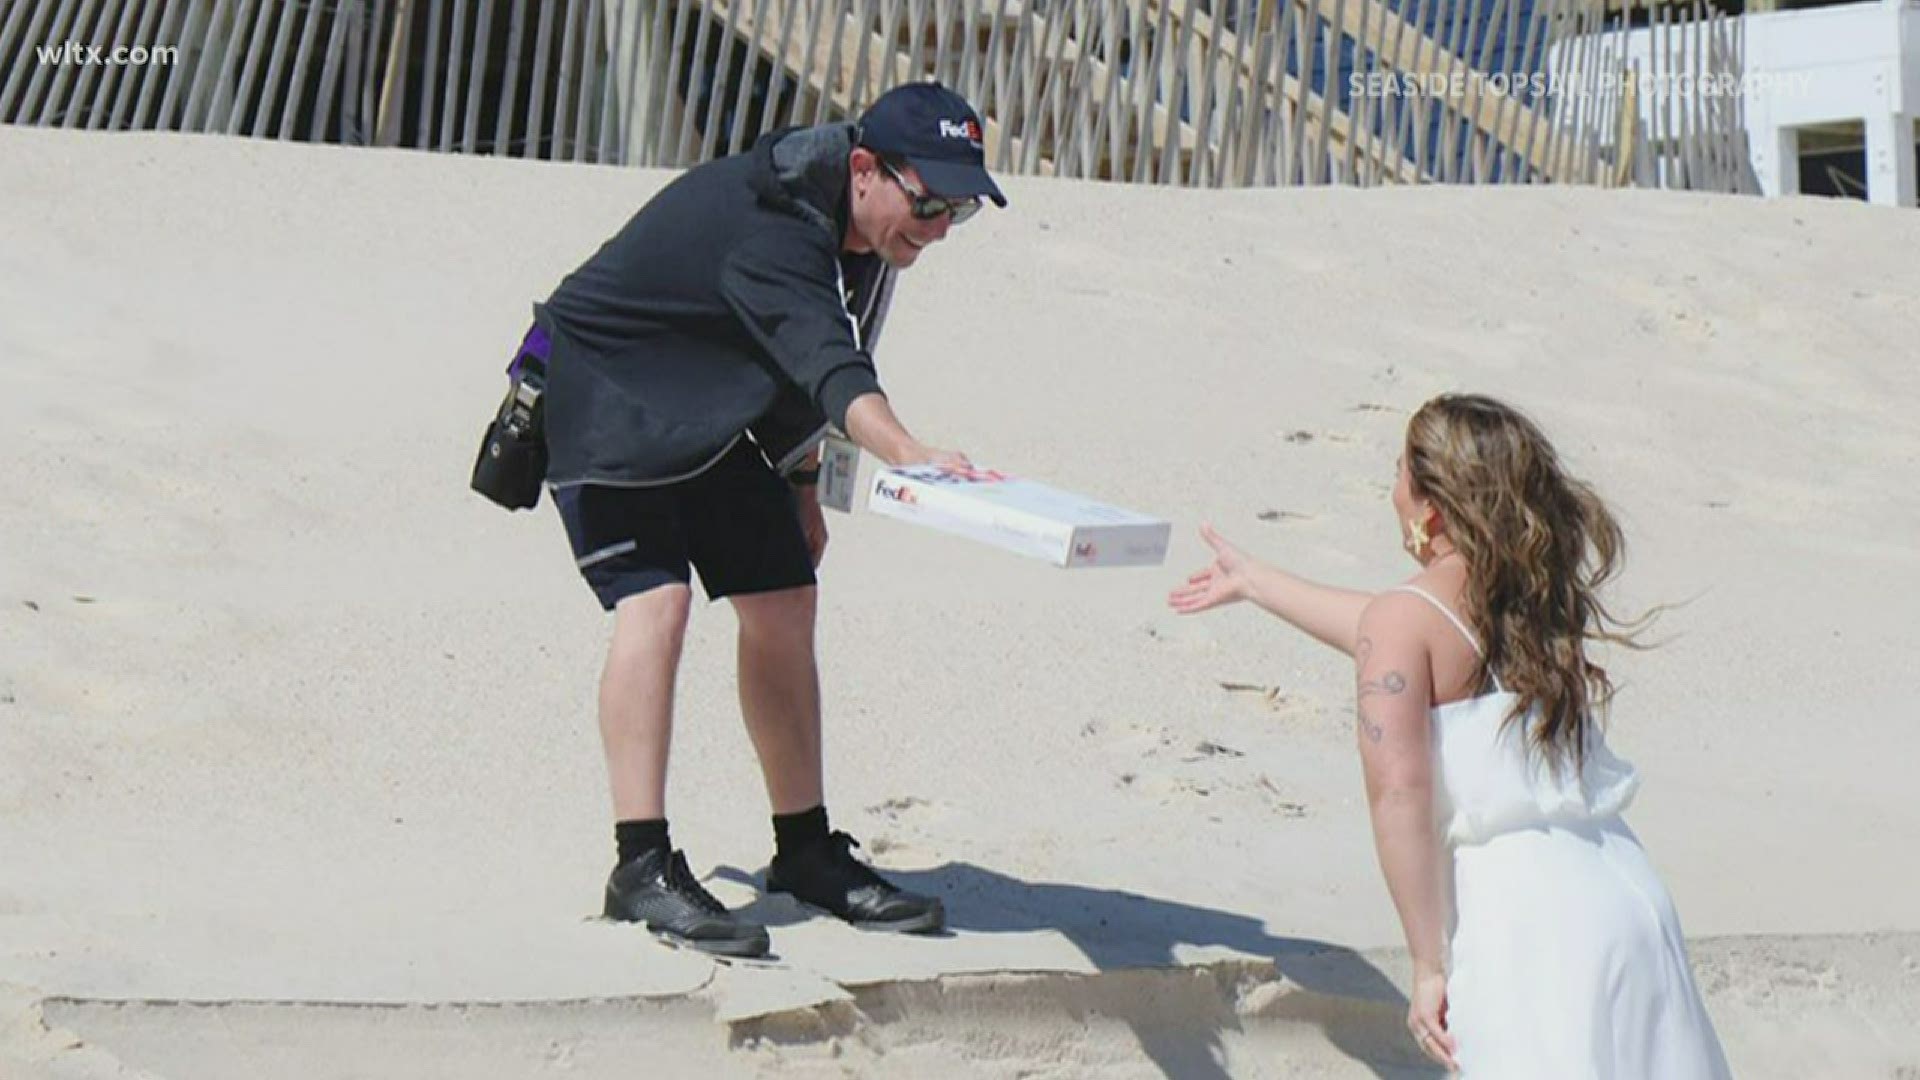 A North Carolina photographer captured the moment when a FedEx man saved the day.